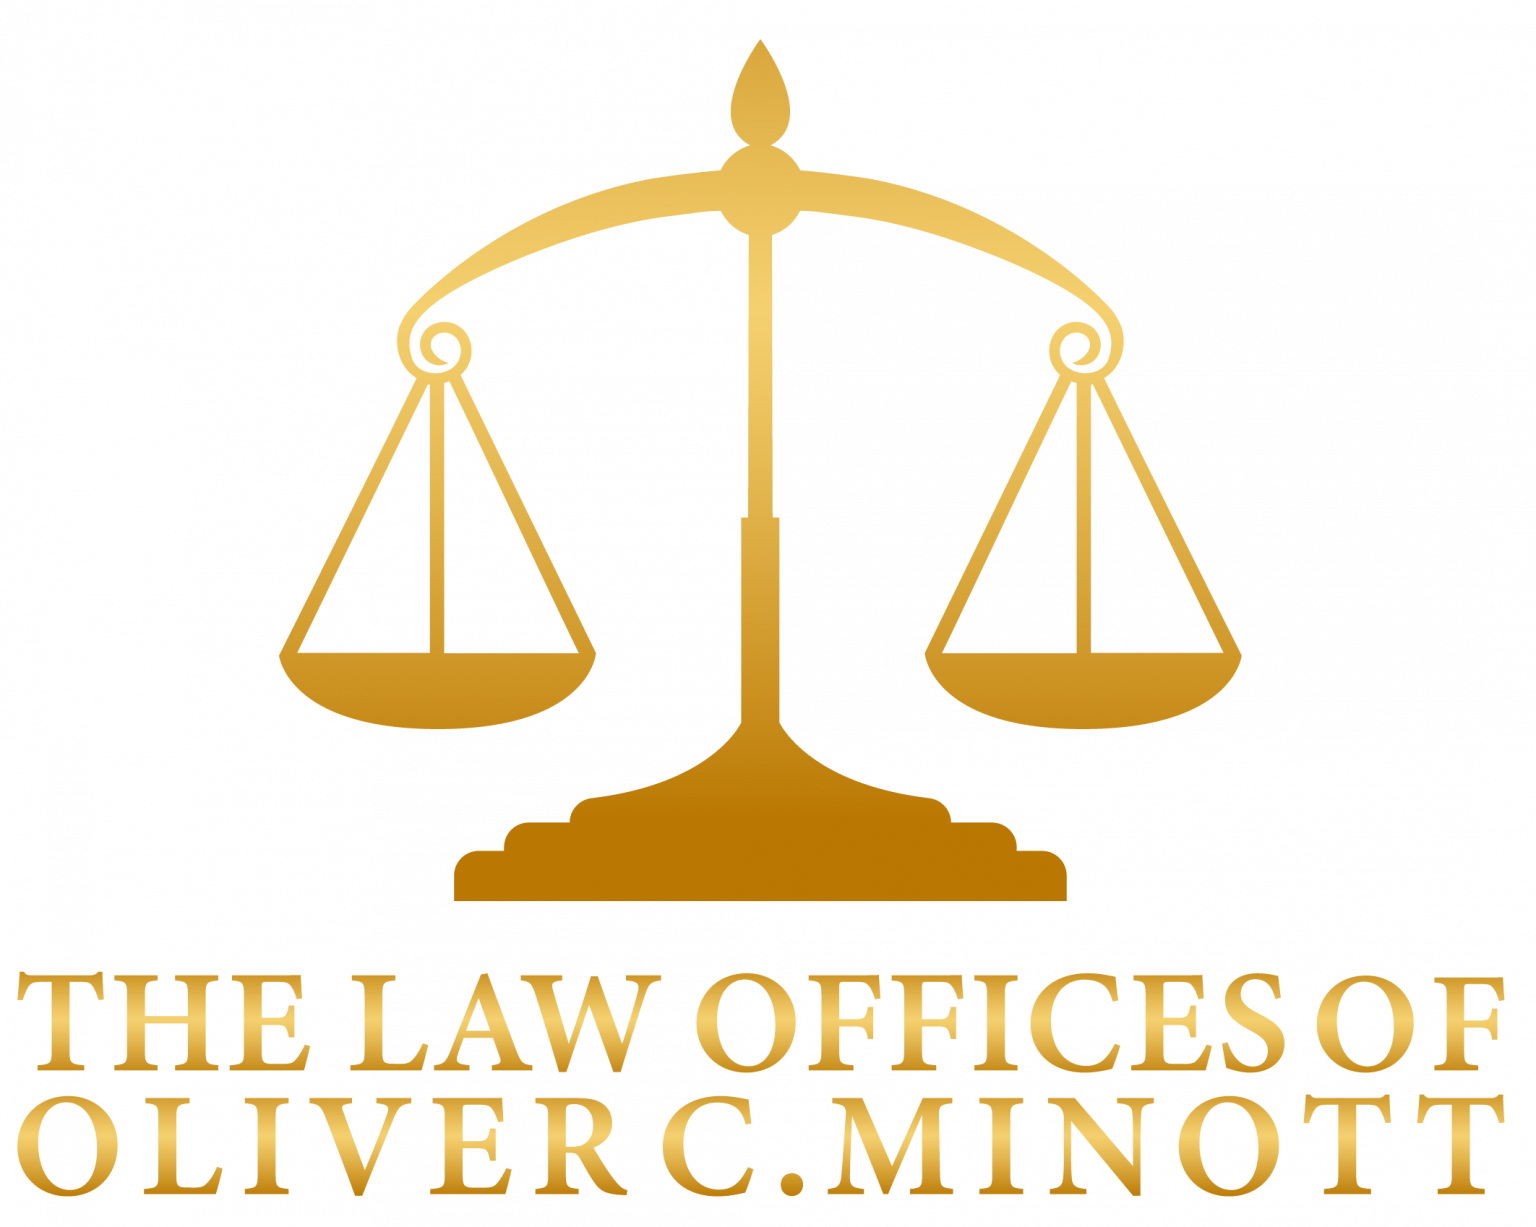 Business logo of The Law Offices of Oliver C. Minott